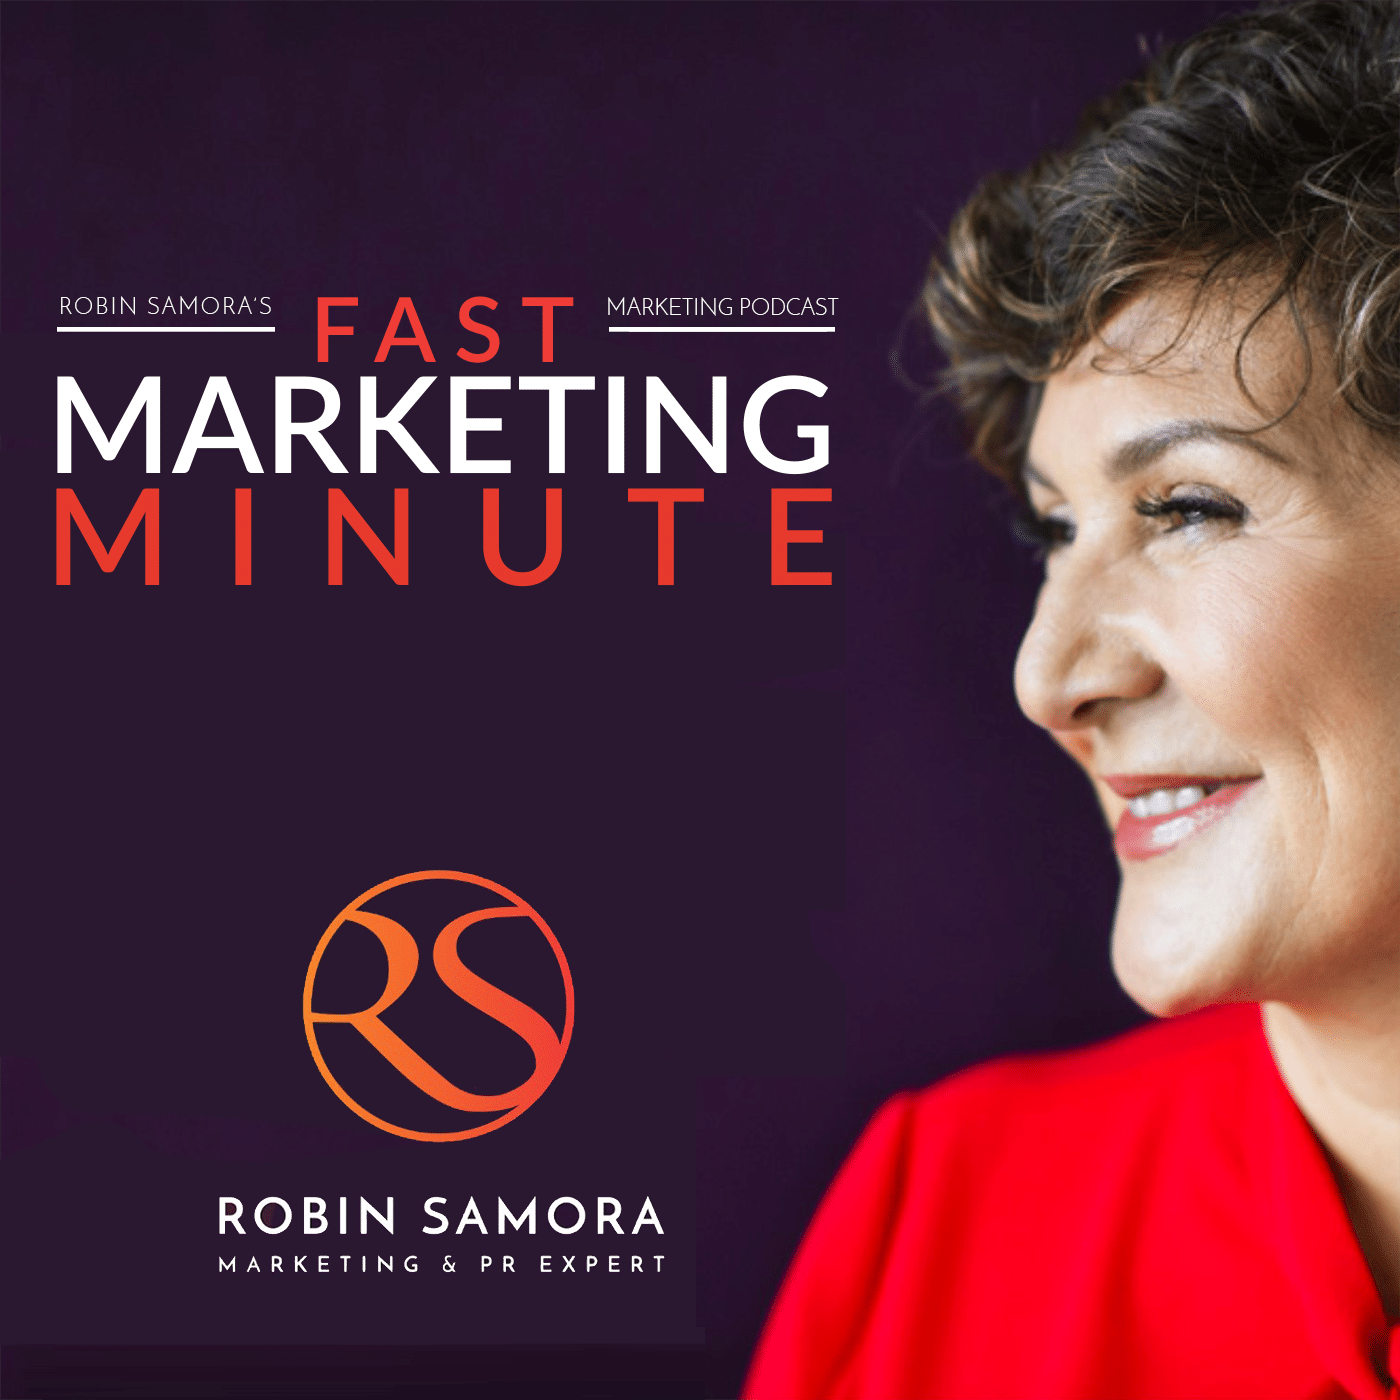 Fast Marketing Minute with Marketing and PR Expert Robin Samora